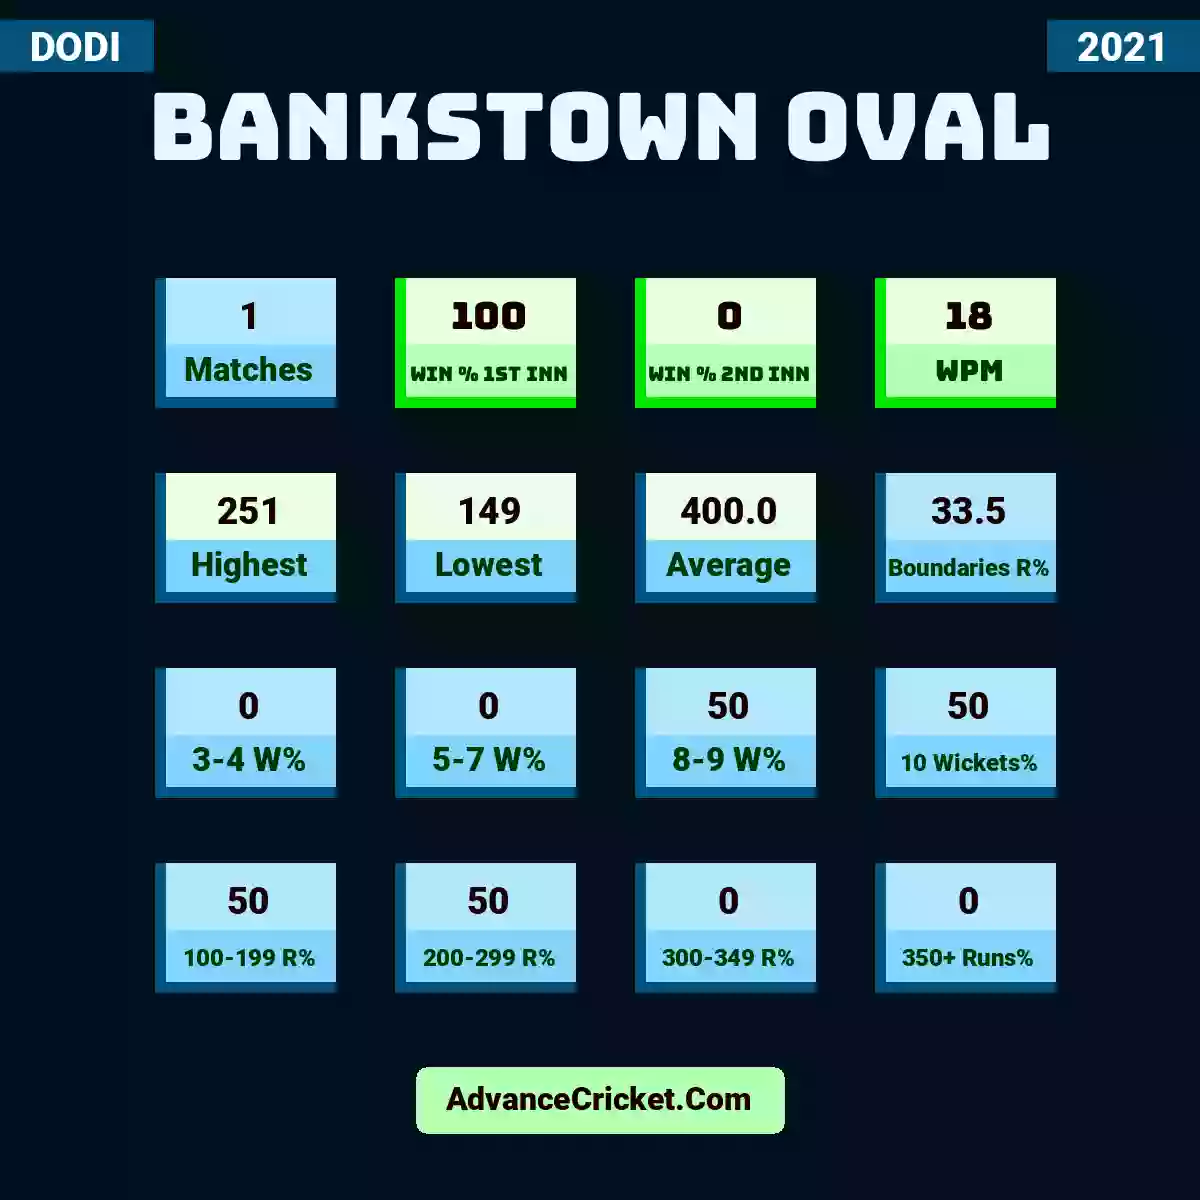 Image showing Bankstown Oval with Matches: 1, Win % 1st Inn: 100, Win % 2nd Inn: 0, WPM: 18, Highest: 251, Lowest: 149, Average: 400.0, Boundaries R%: 33.5, 3-4 W%: 0, 5-7 W%: 0, 8-9 W%: 50, 10 Wickets%: 50, 100-199 R%: 50, 200-299 R%: 50, 300-349 R%: 0, 350+ Runs%: 0.